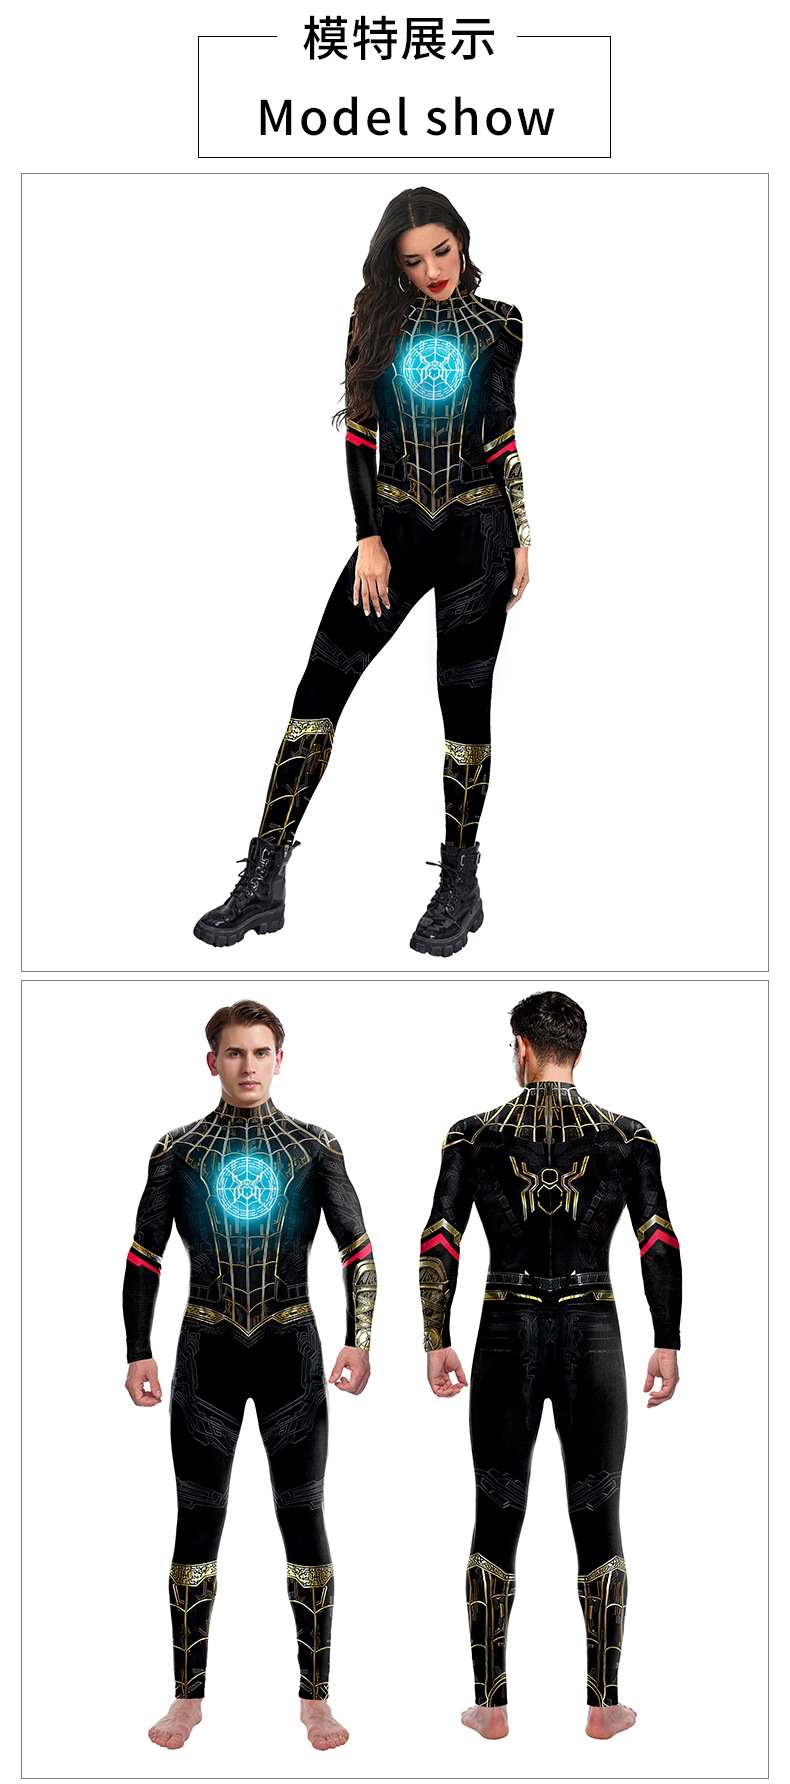 2021 spider-man no way home cosplay jumpsuit - model show